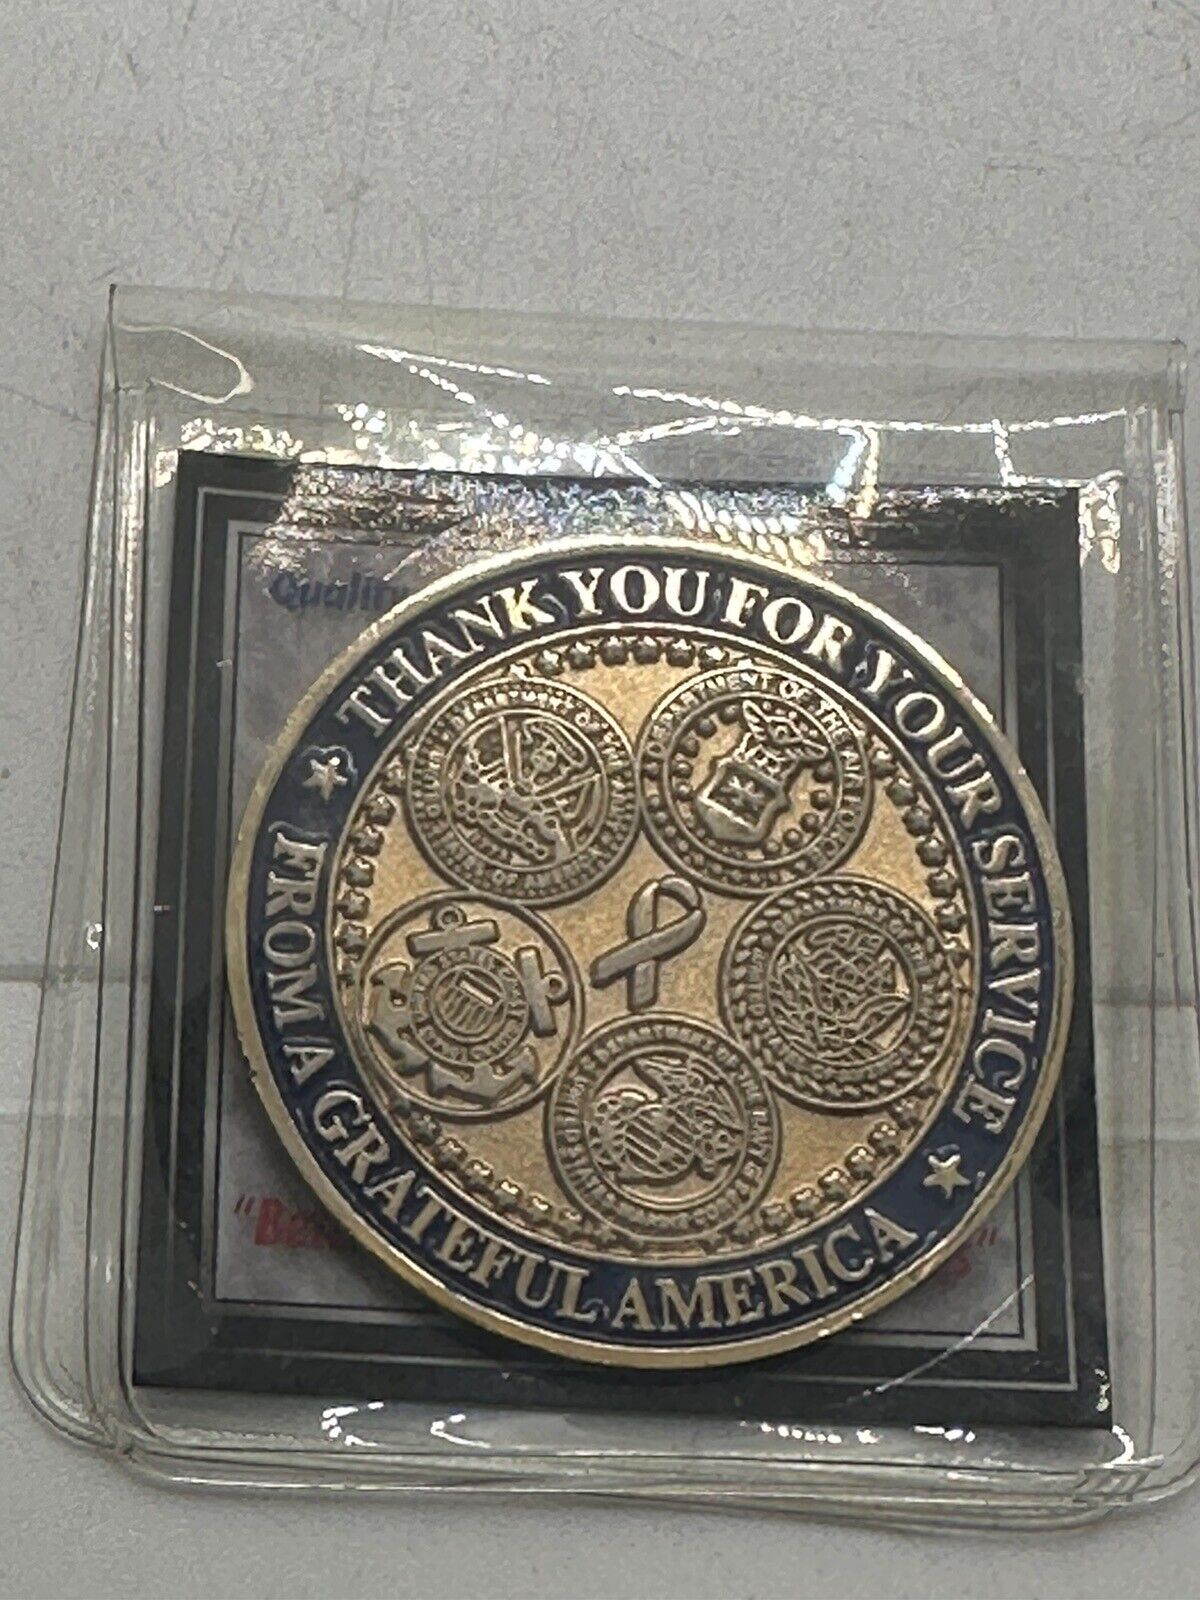 Rare U.S. Armed Forces Gold Tone Challenge Commemorative Coin